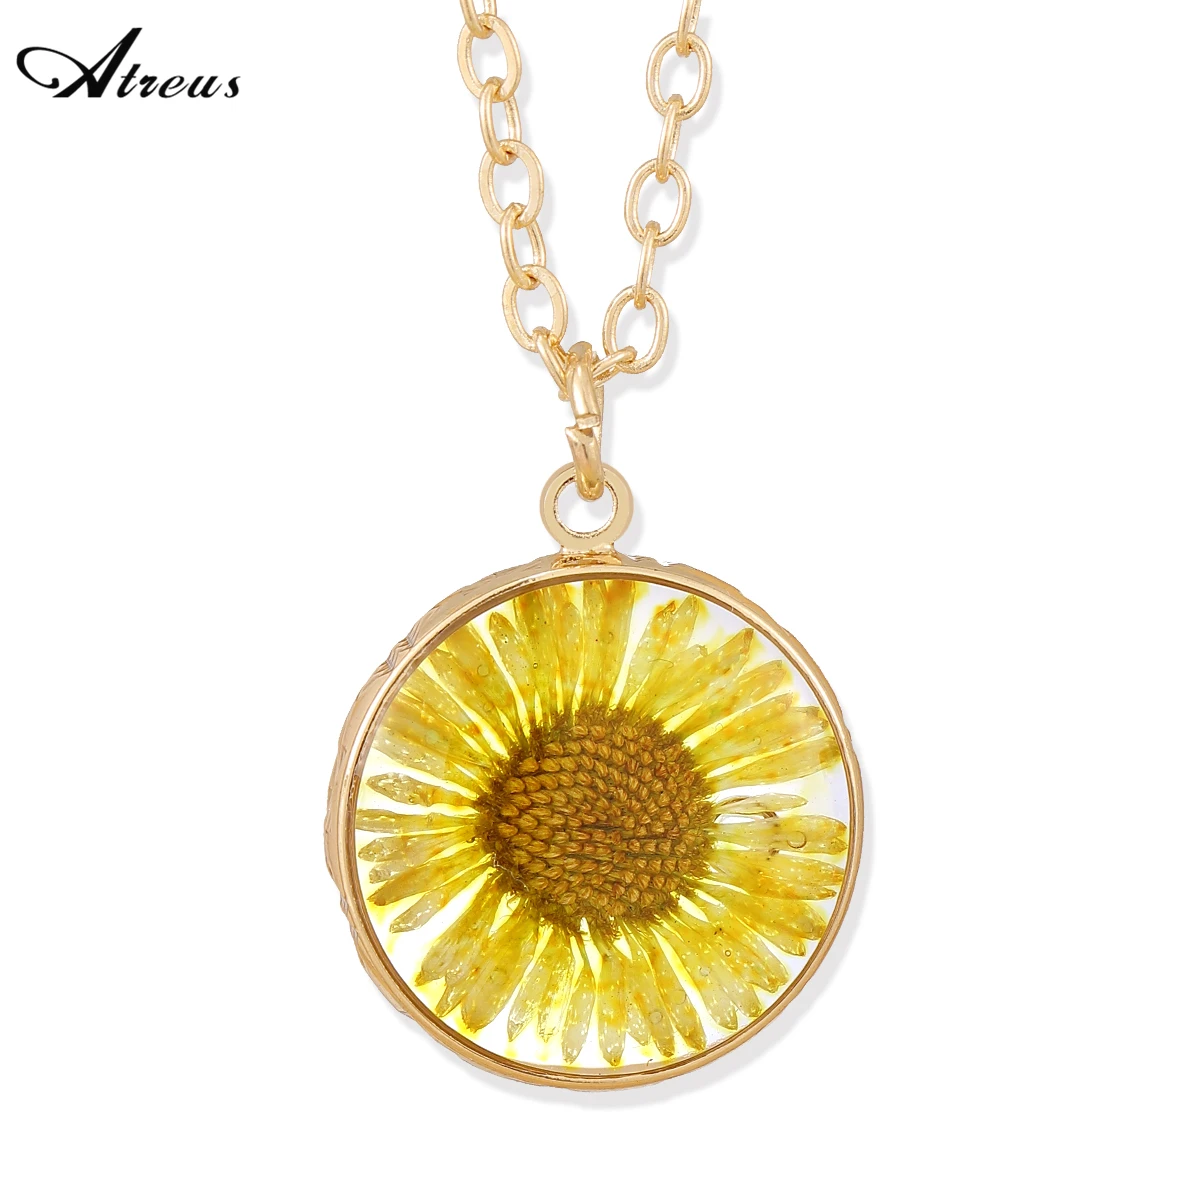 Купи Daisy Dry Flower style Necklace For Women Memory Gift Small Sunflower Pendant Necklace Gold Plated Jewelry за 98 рублей в магазине AliExpress